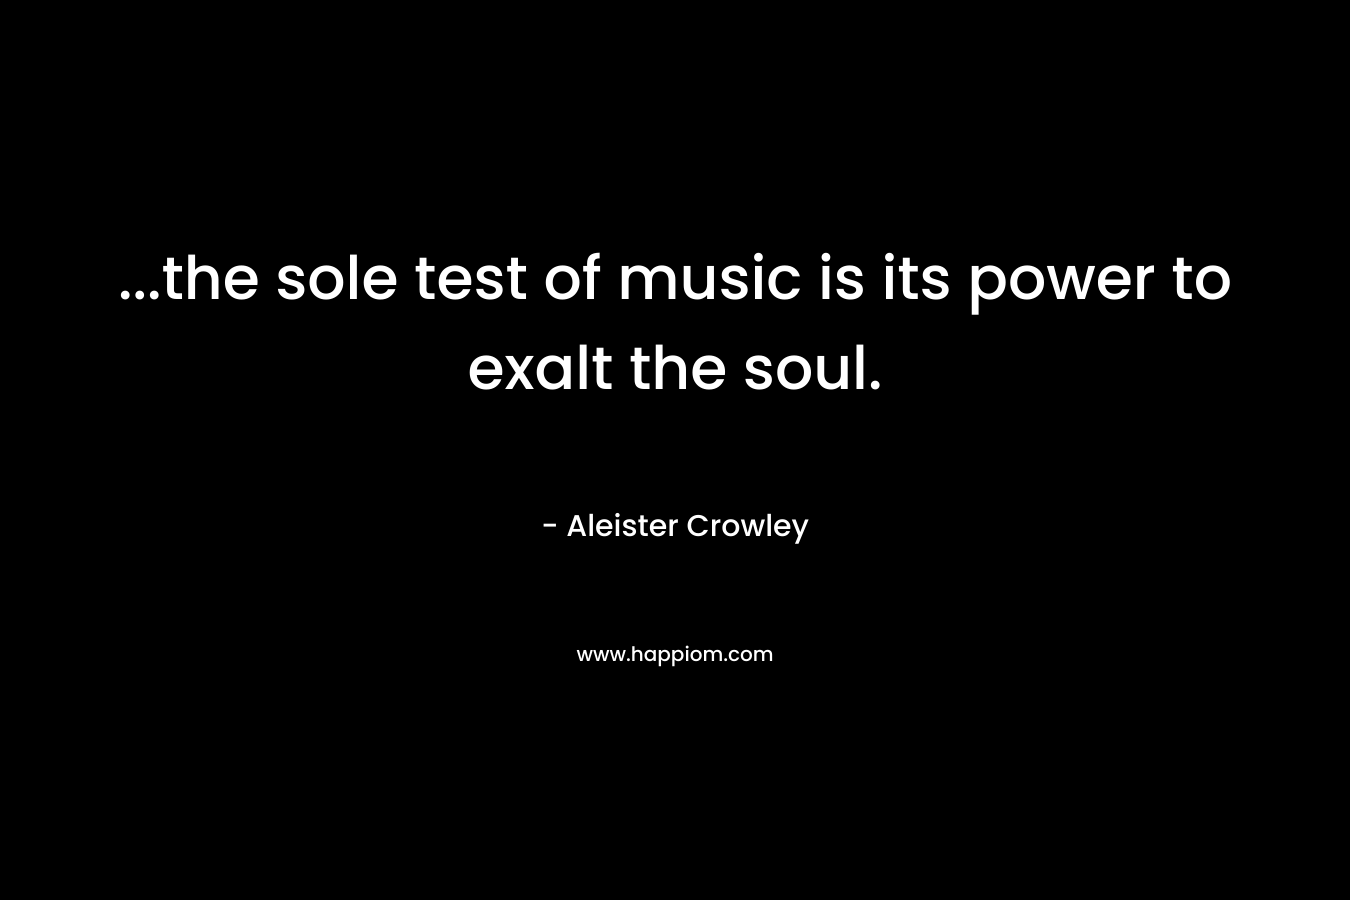 ...the sole test of music is its power to exalt the soul.